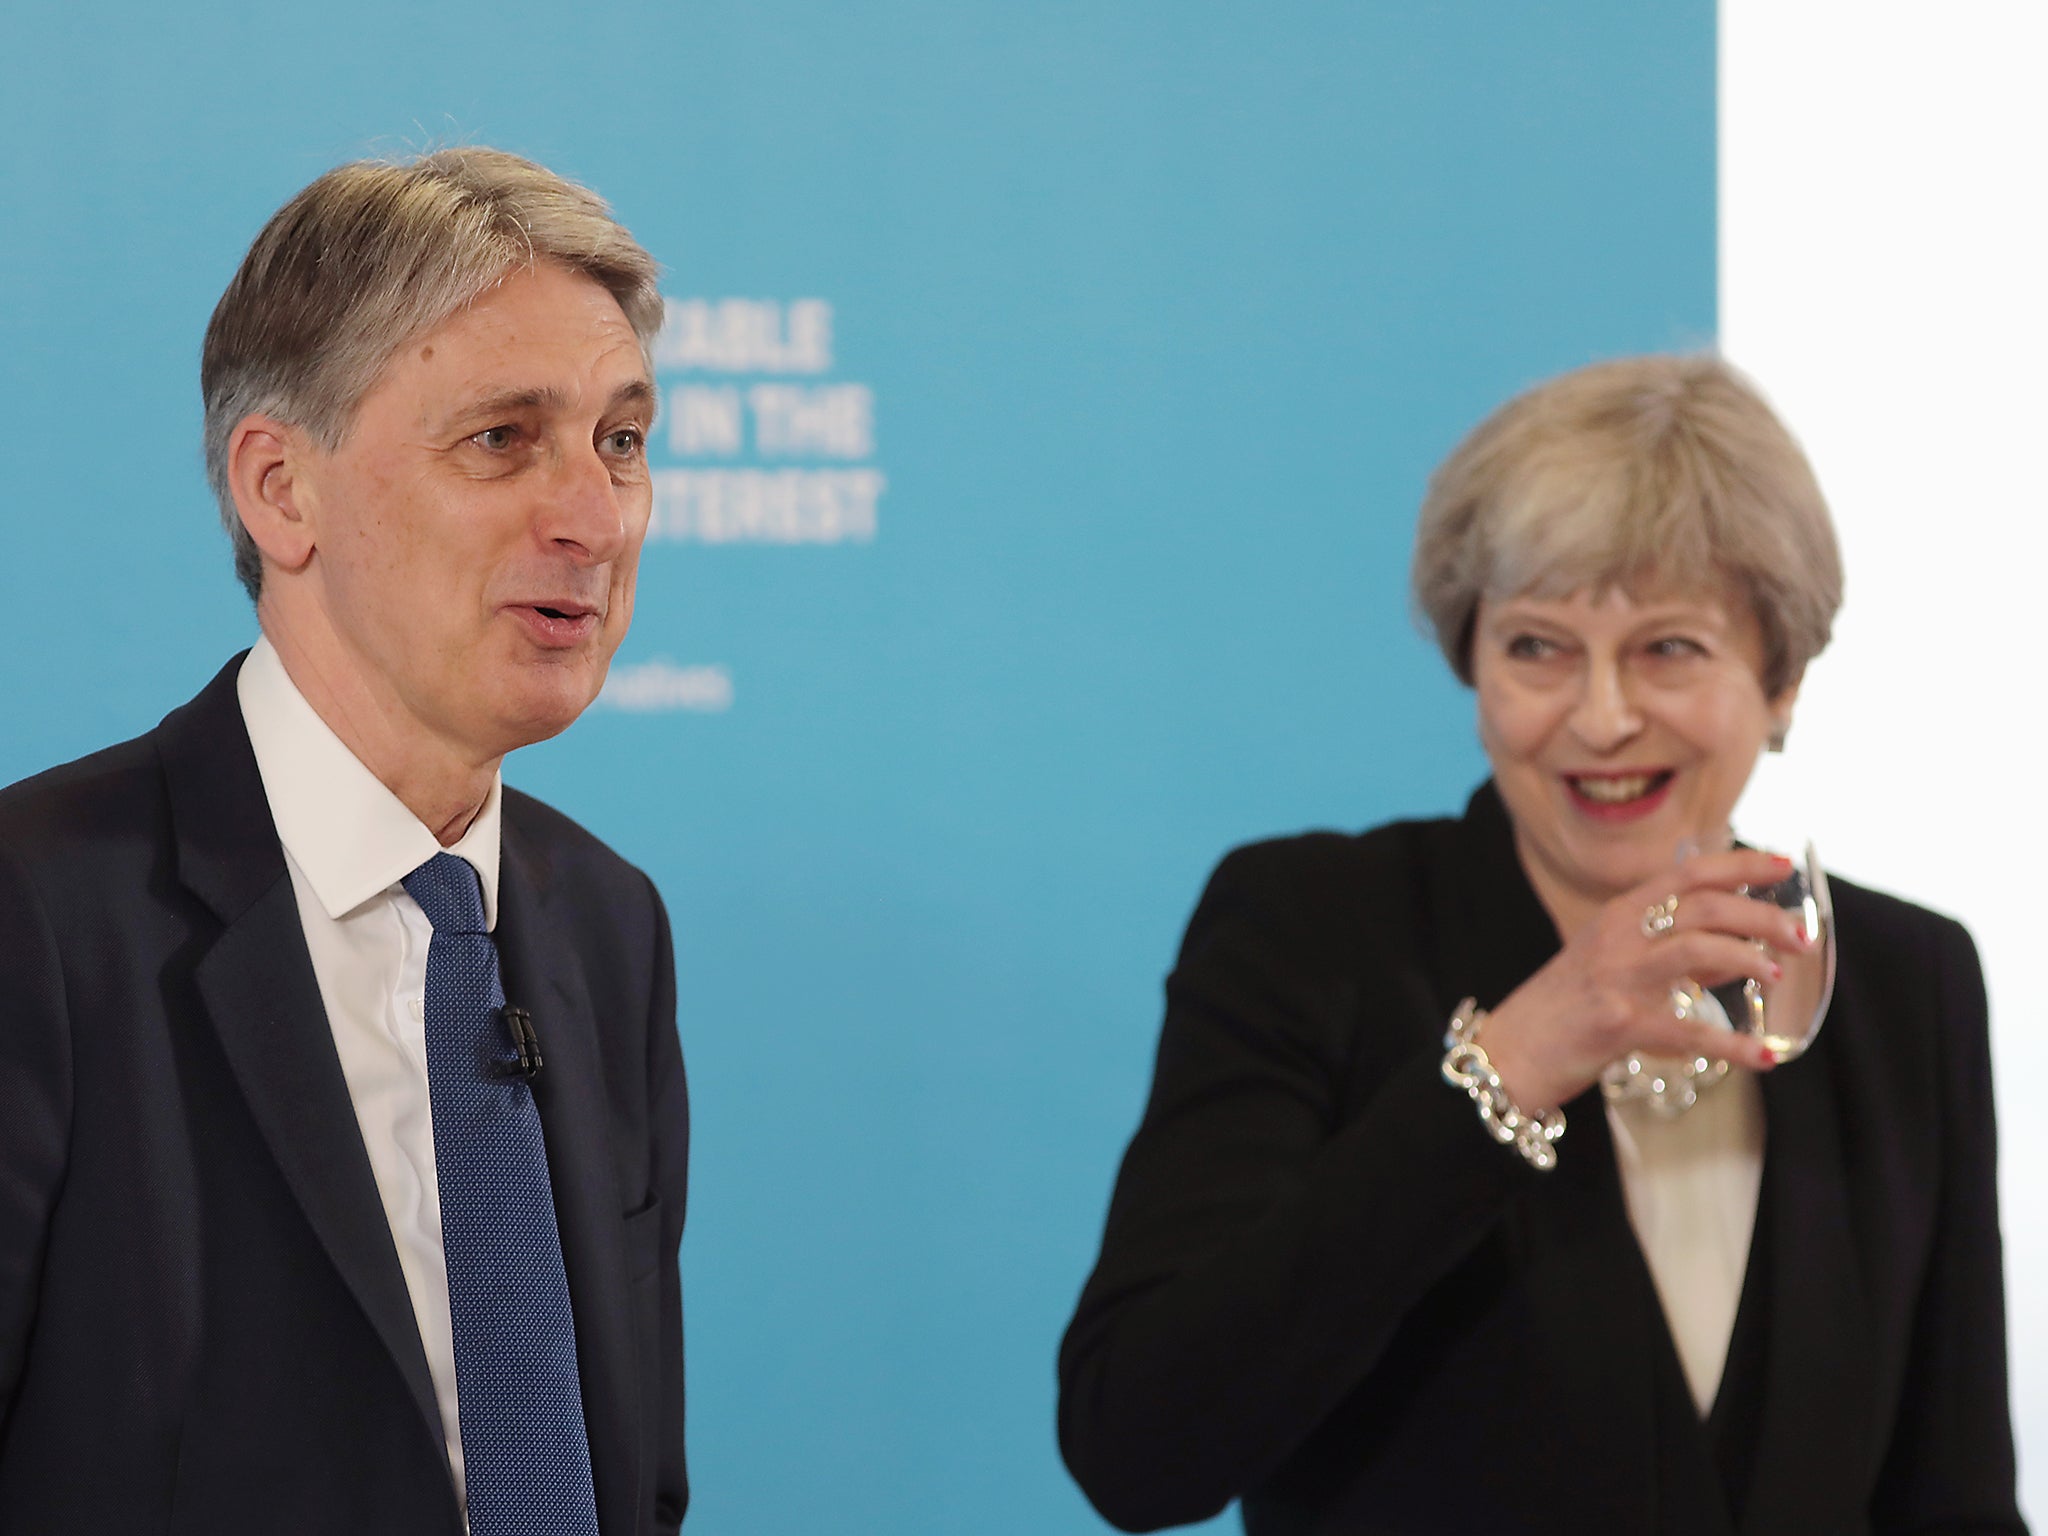 Hammond may find himself out of a job after the election